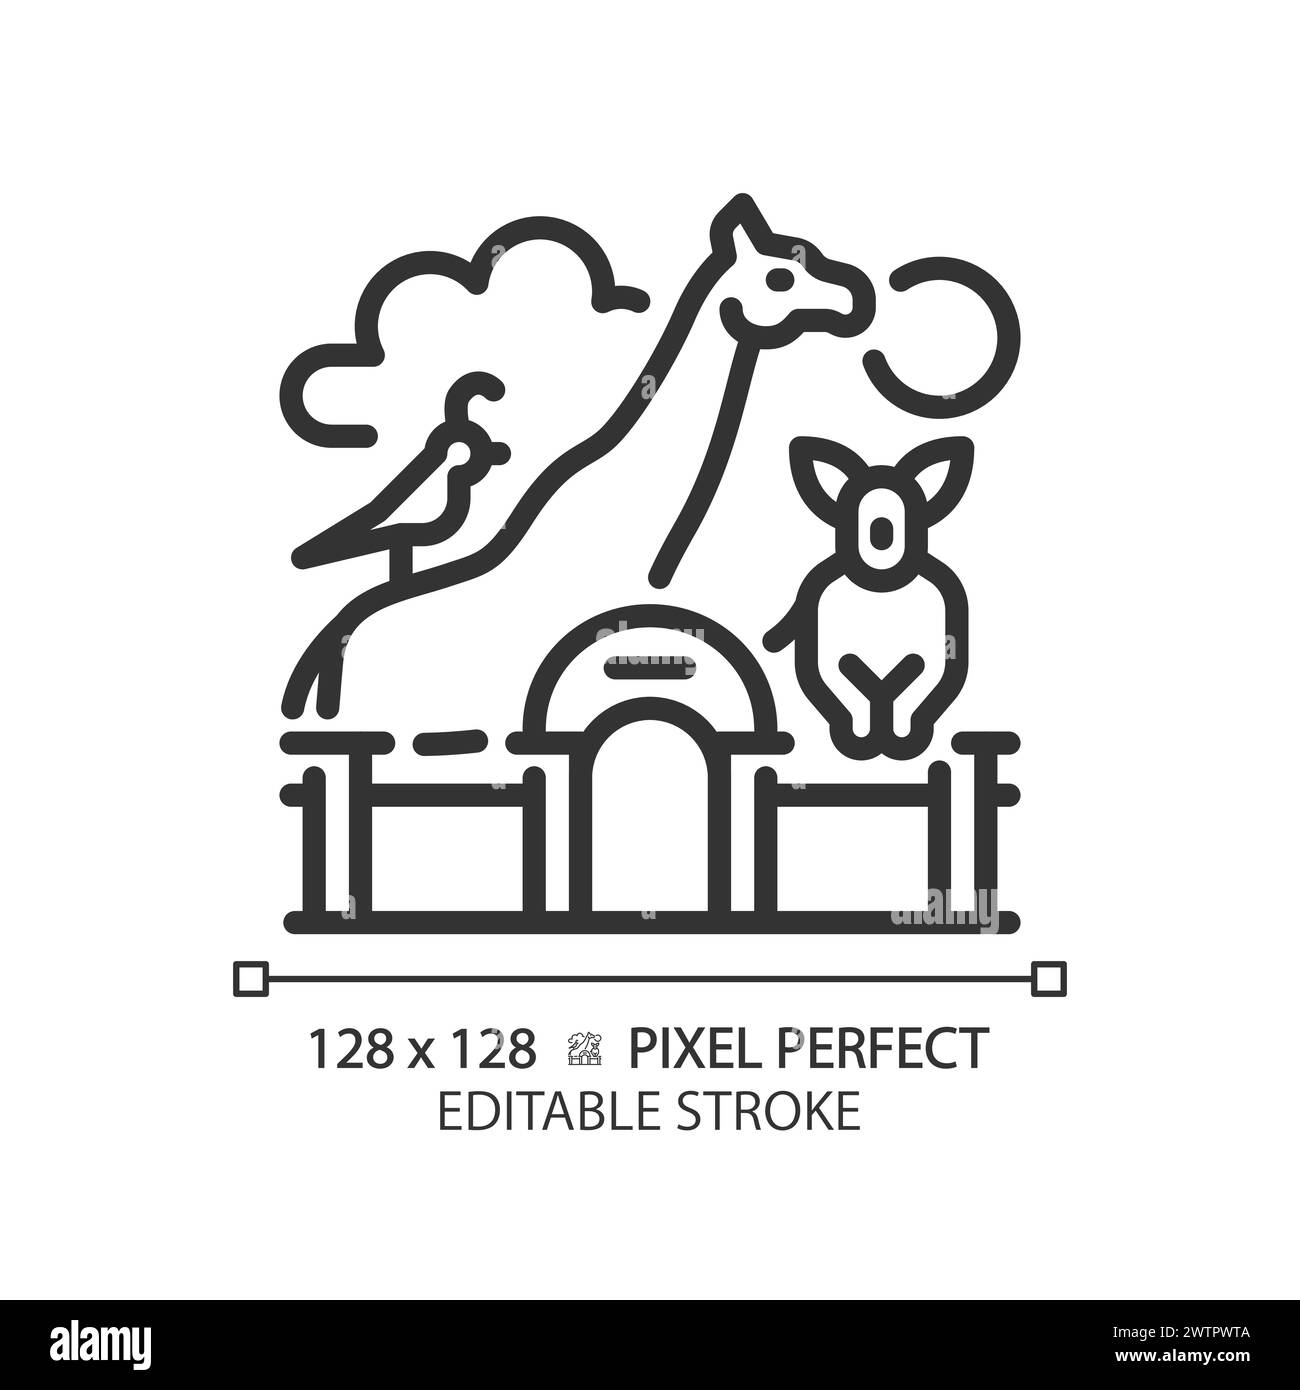 Zoo life exhibition pixel perfect linear icon Stock Vector